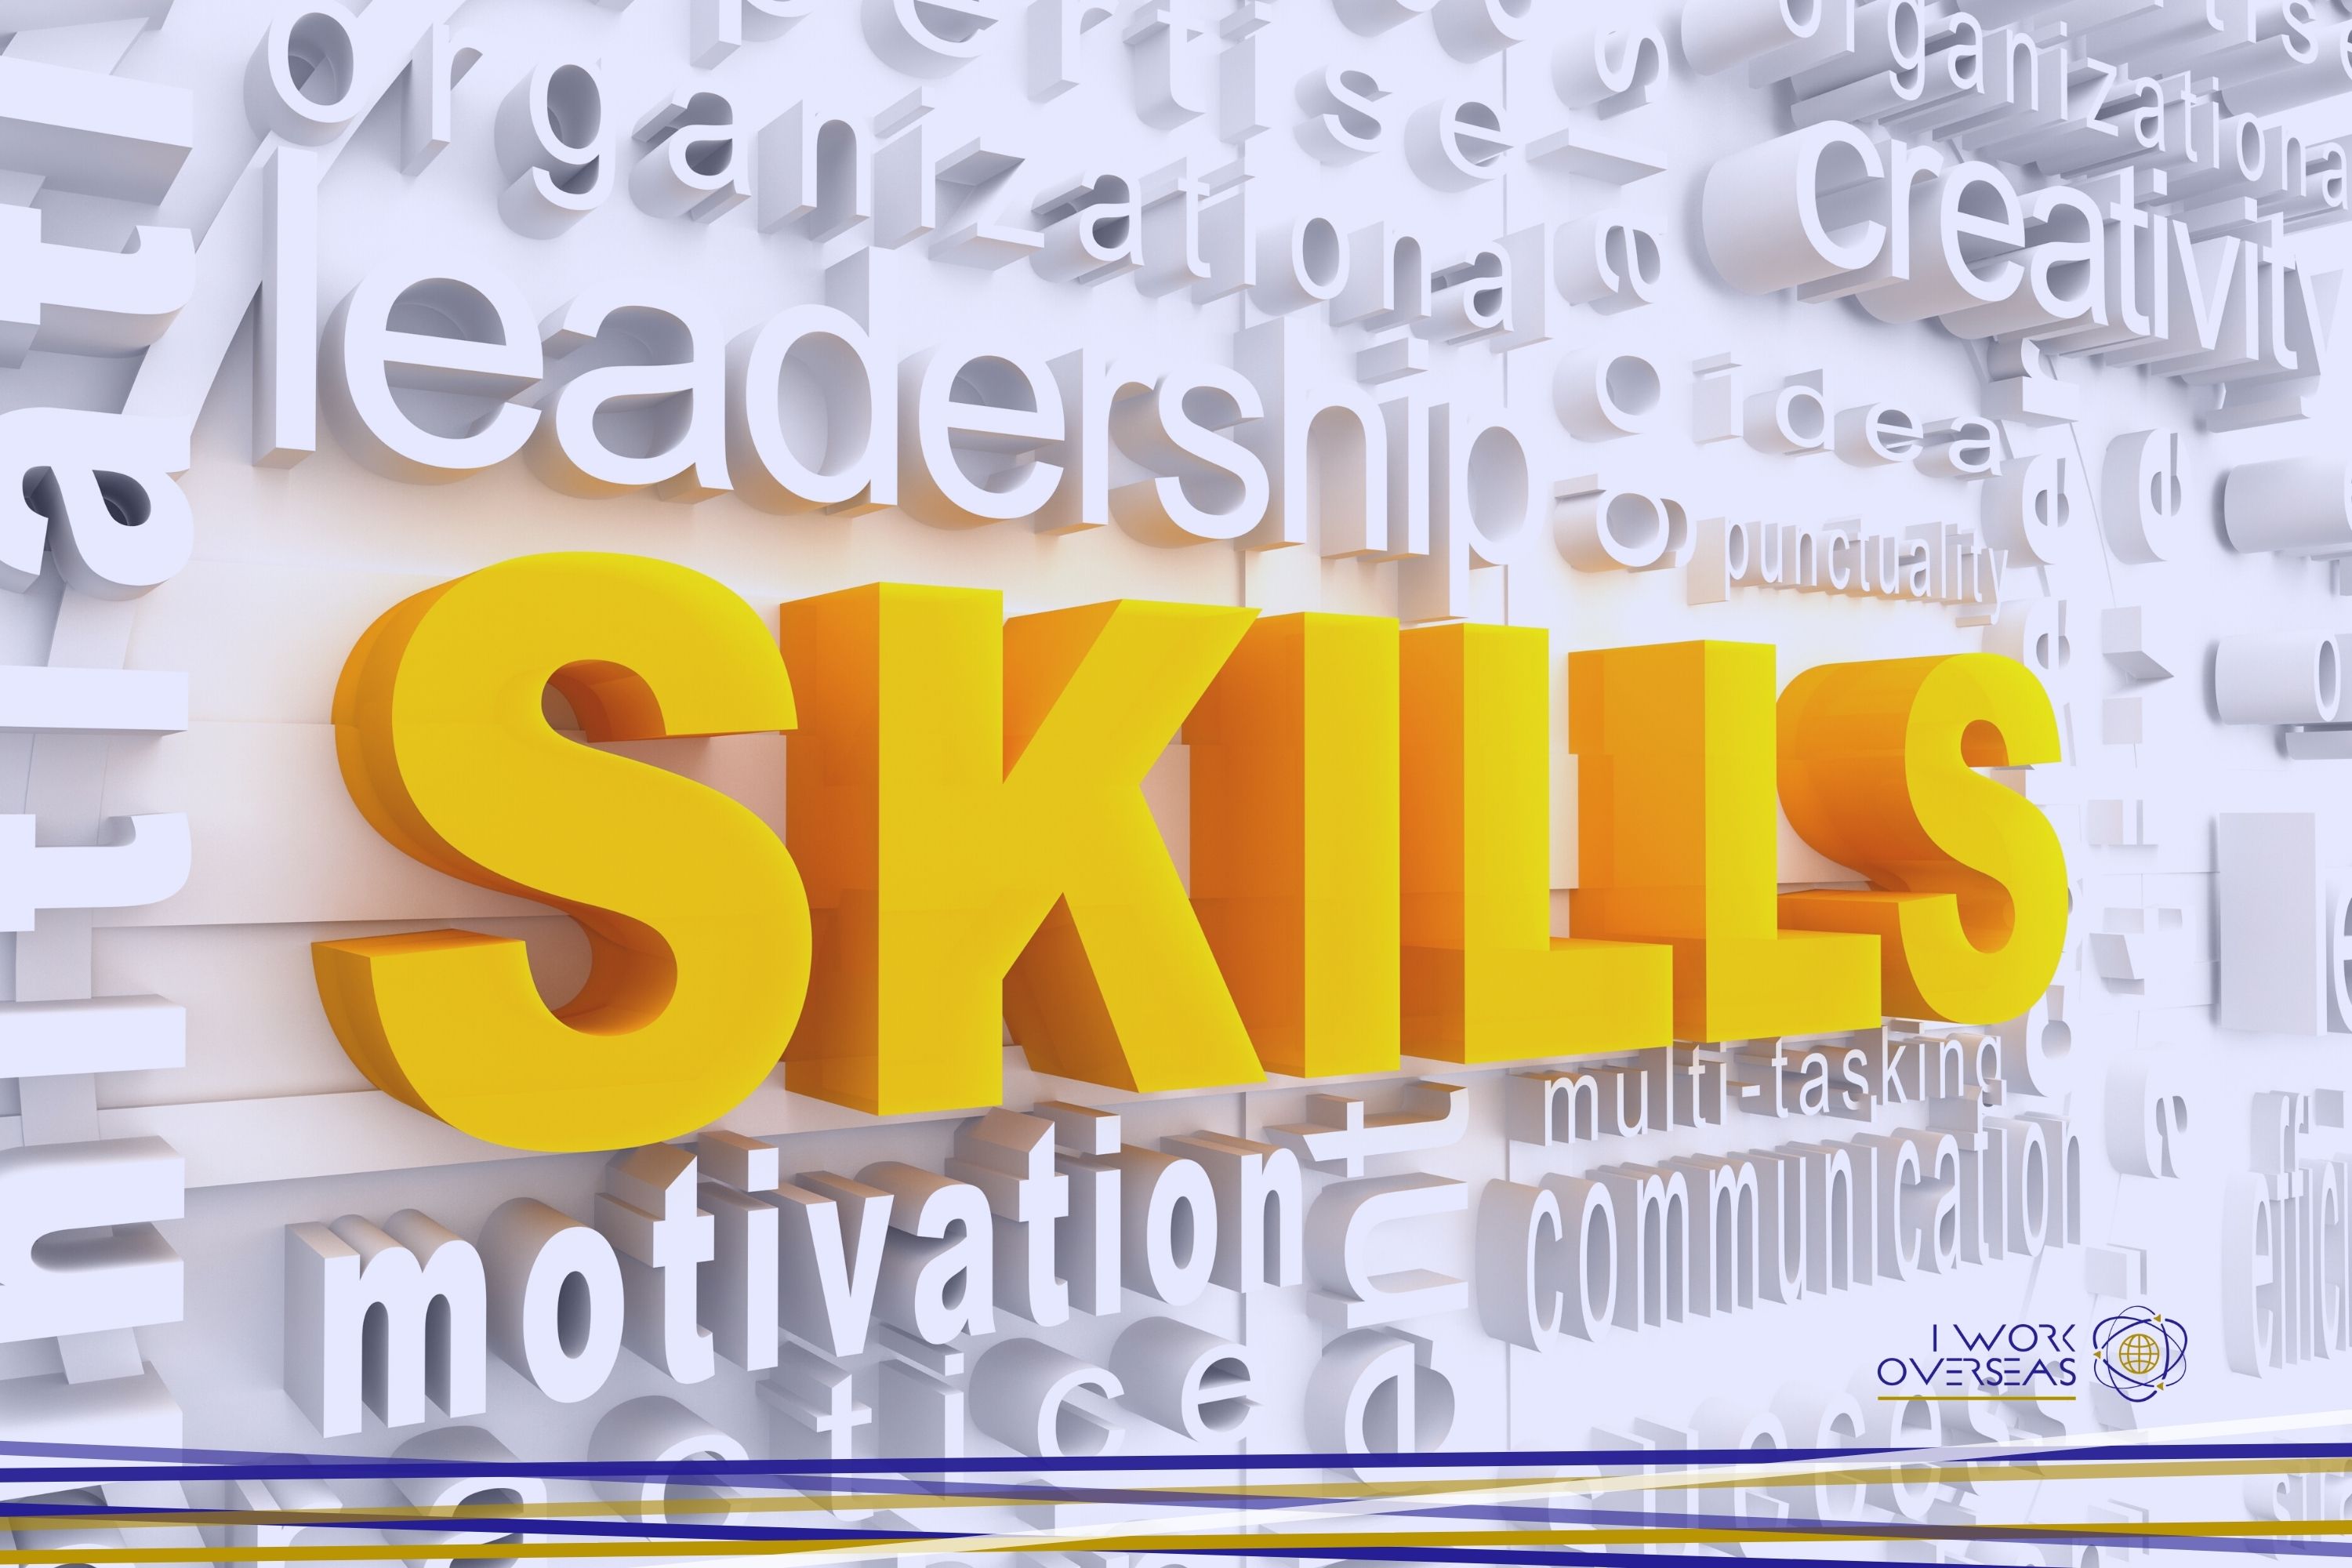 Resume Tips: Must-have soft skills to highlight in a nurse resume